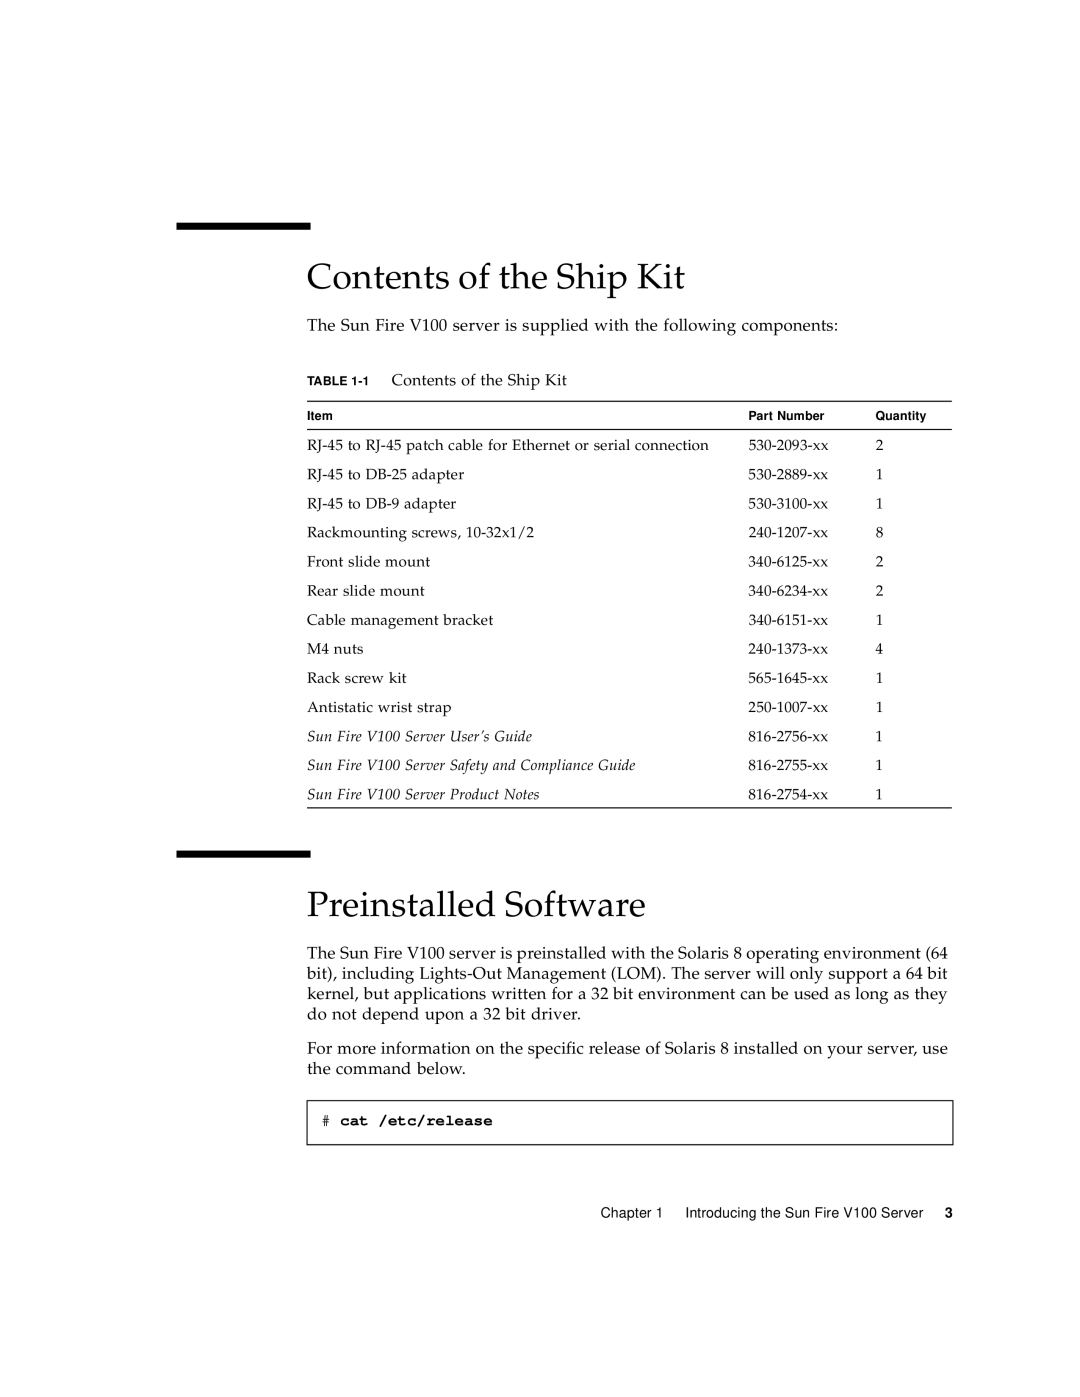 Sun Microsystems Sun Fire V100 manual Contents of the Ship Kit, Preinstalled Software 